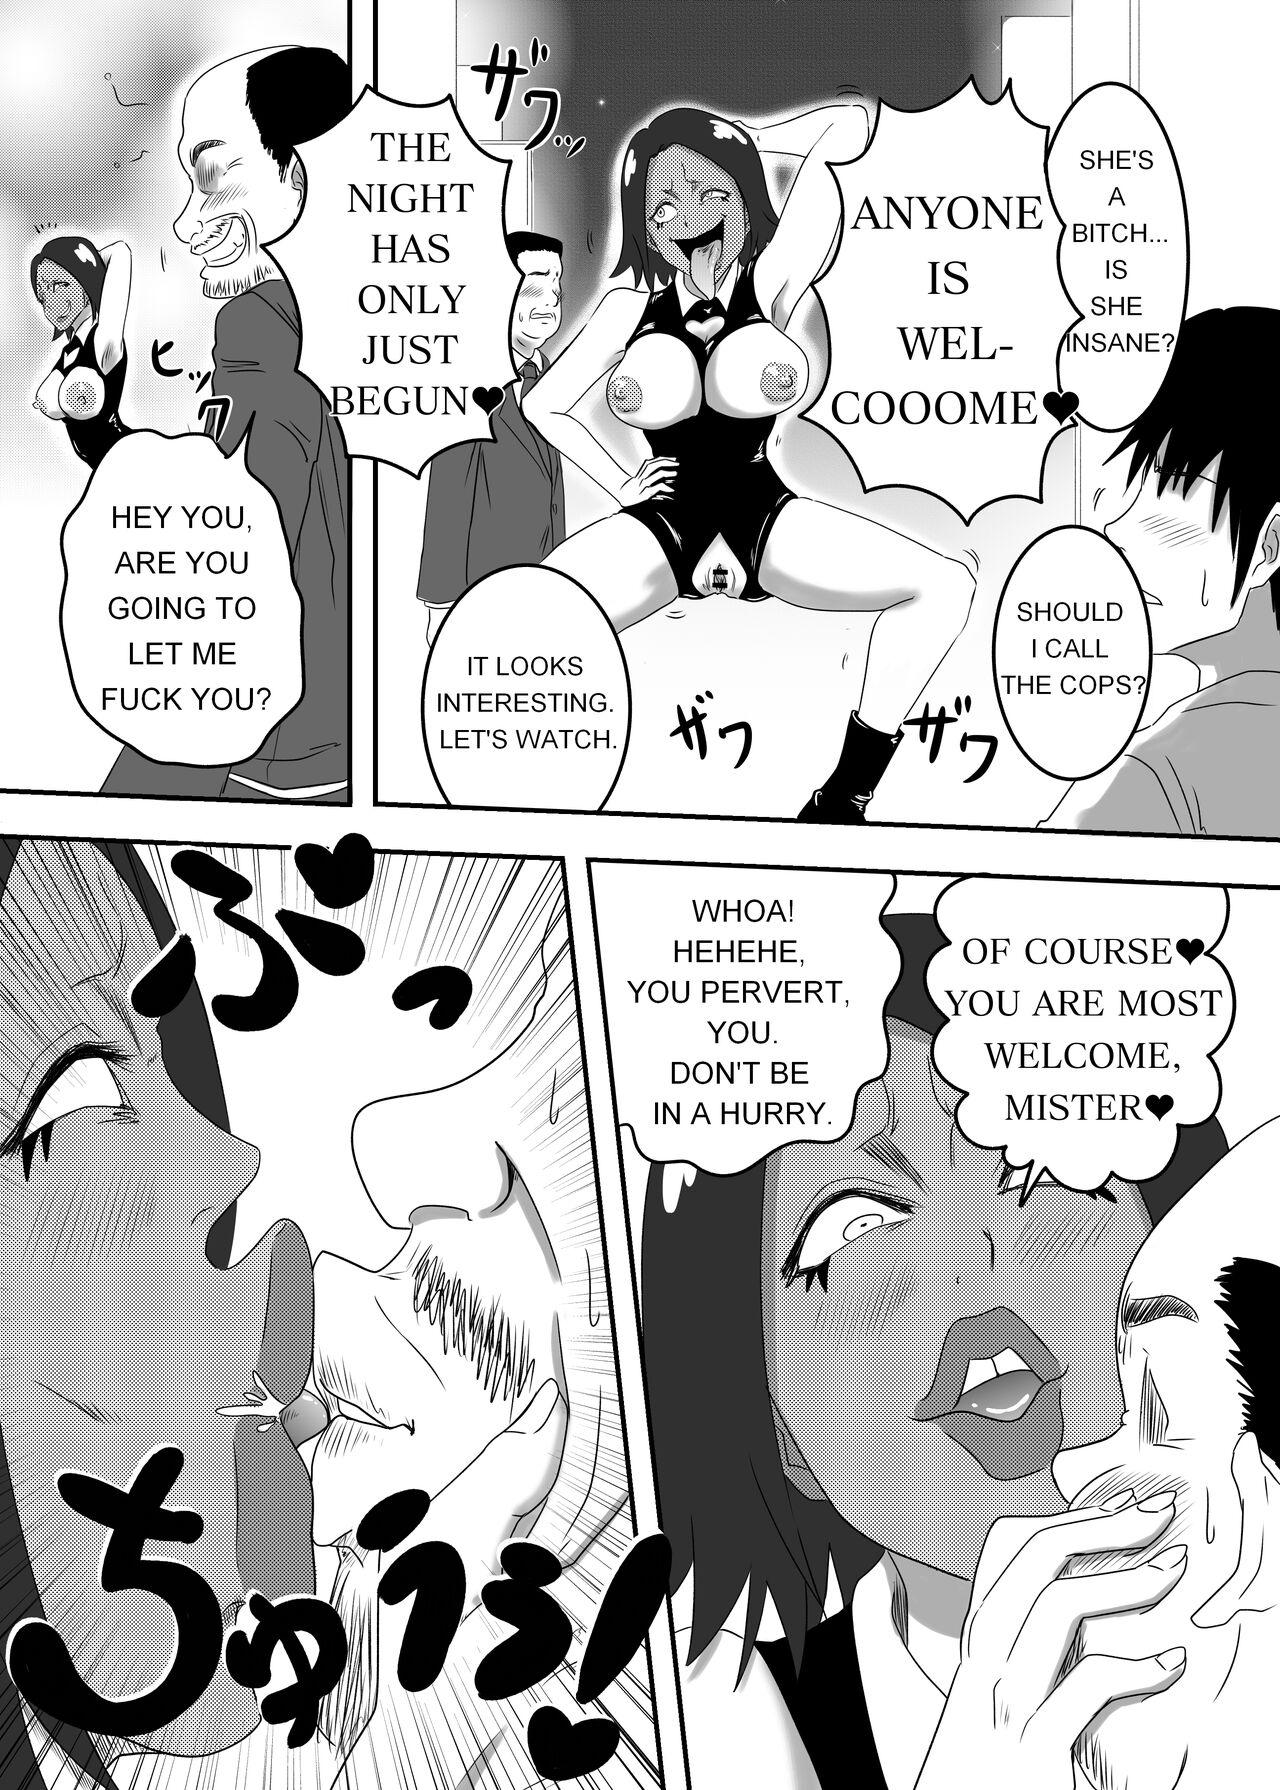 Role Play The Evil Mask 2 - Original Camgirl - Page 10